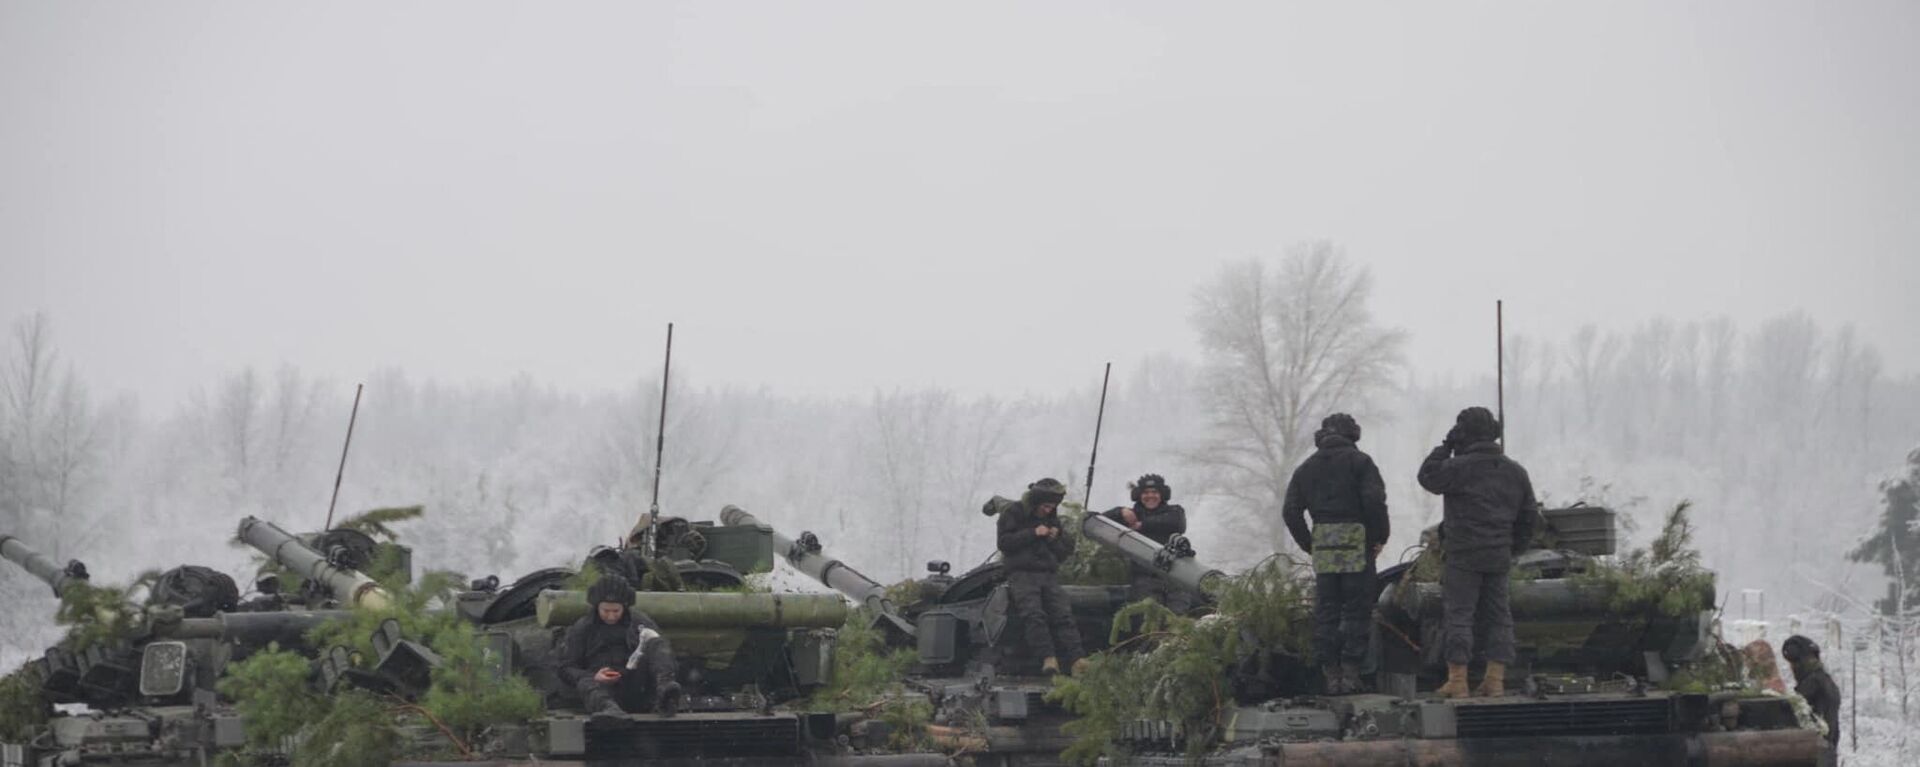 Service members of the 92nd Separate Mechanized Brigade of the Ukrainian Armed Forces take part in military drills at a shooting range in Kharkiv region, Ukraine, in this handout picture released December 20, 2021. Press Service of the 92nd Separate Mechanized Brigade/Handout via REUTERS  - Sputnik International, 1920, 25.01.2022